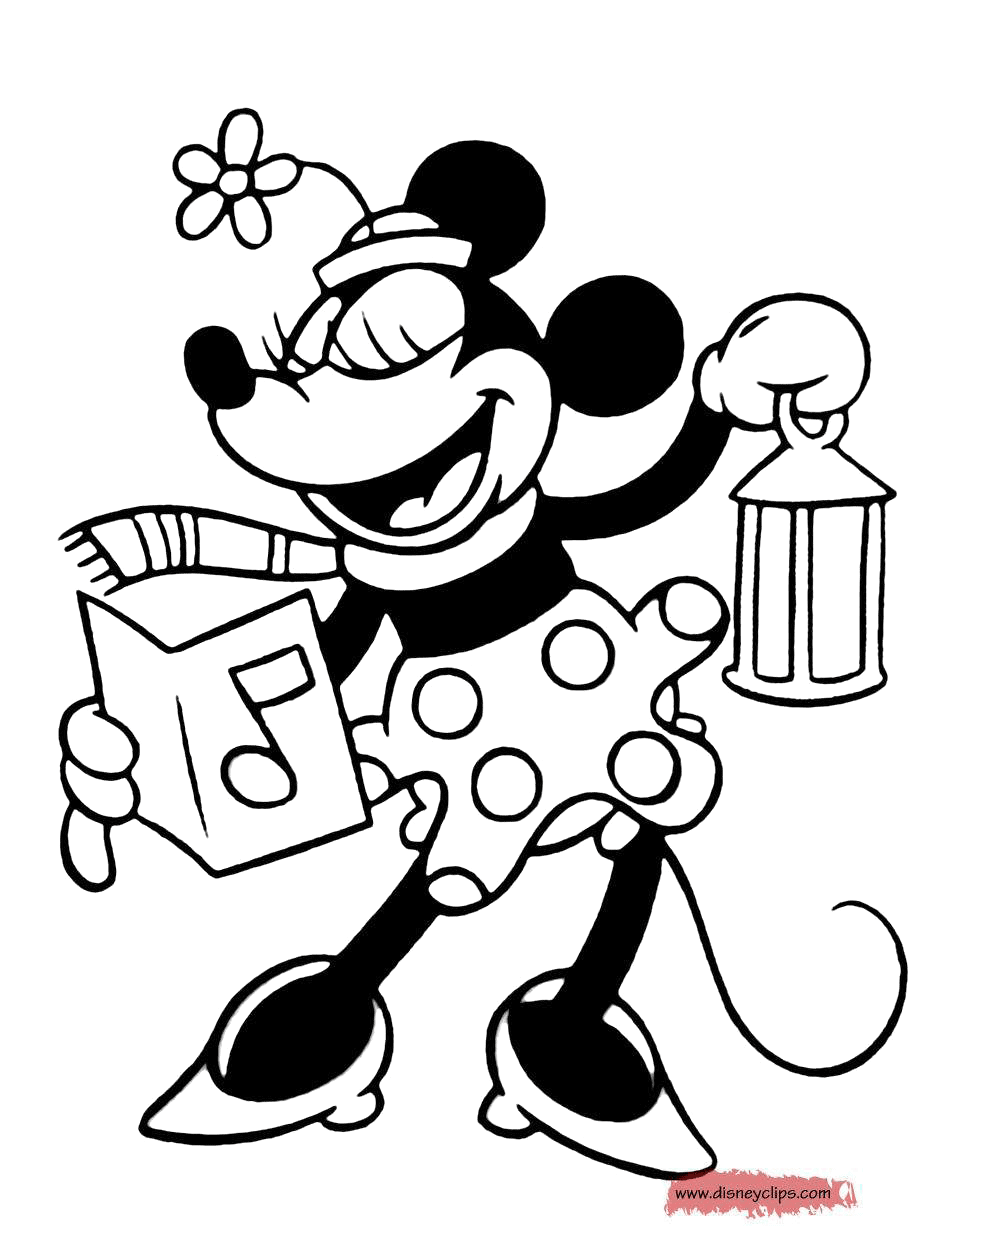 Disney Christmas Coloring Pages (4)